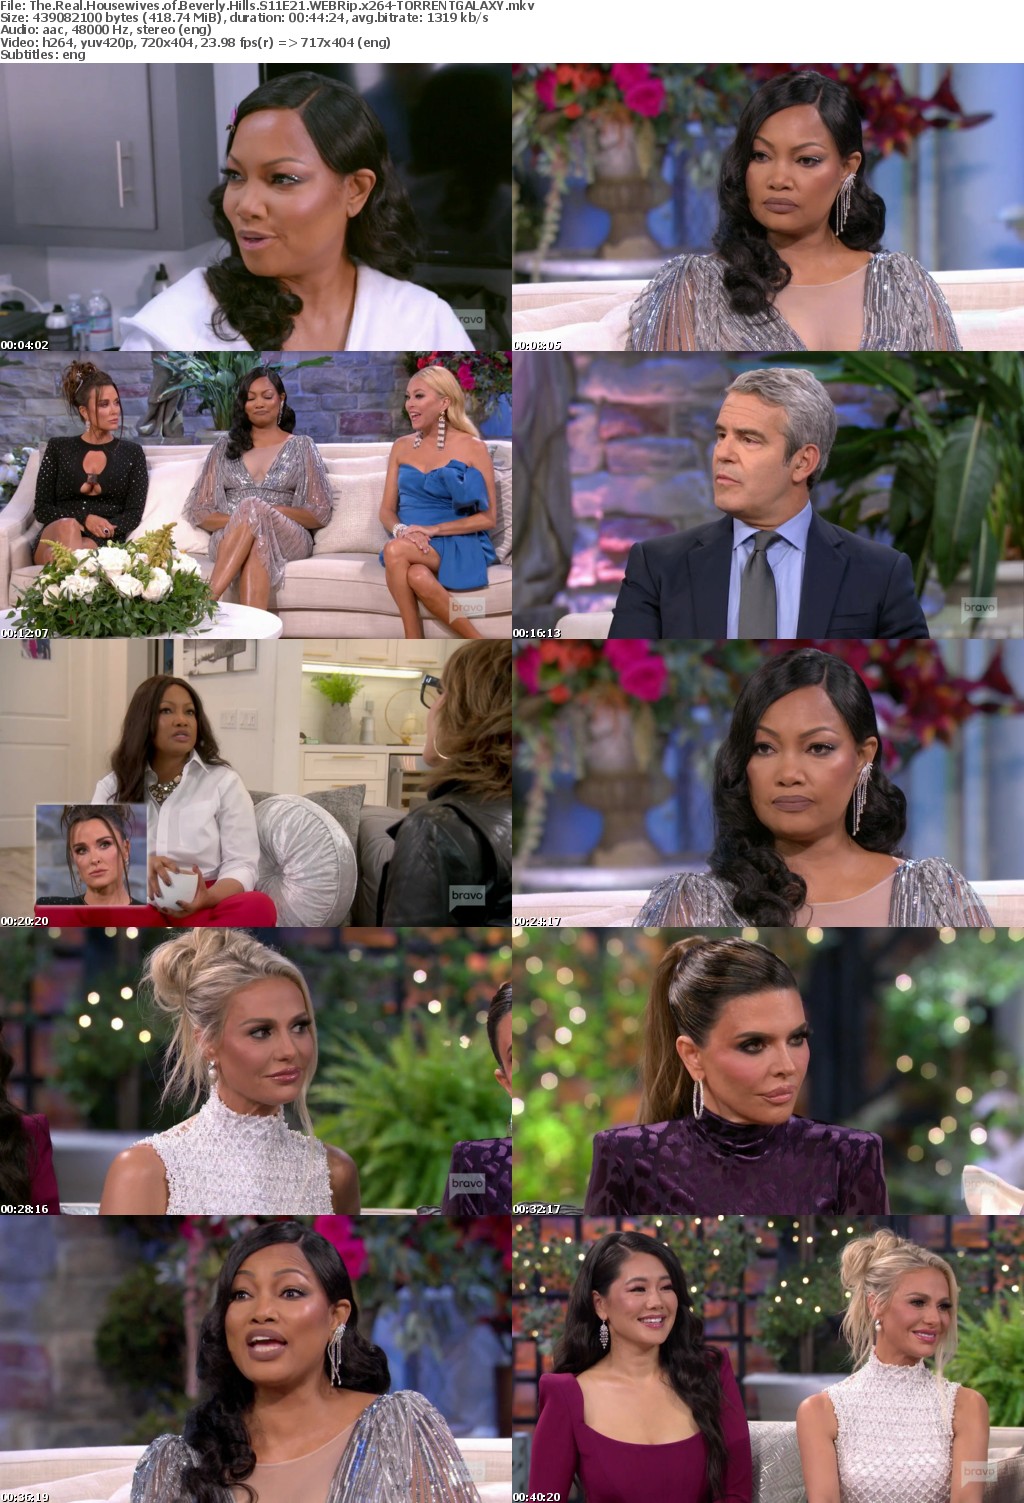 The Real Housewives of Beverly Hills S11E21 WEBRip x264-GALAXY